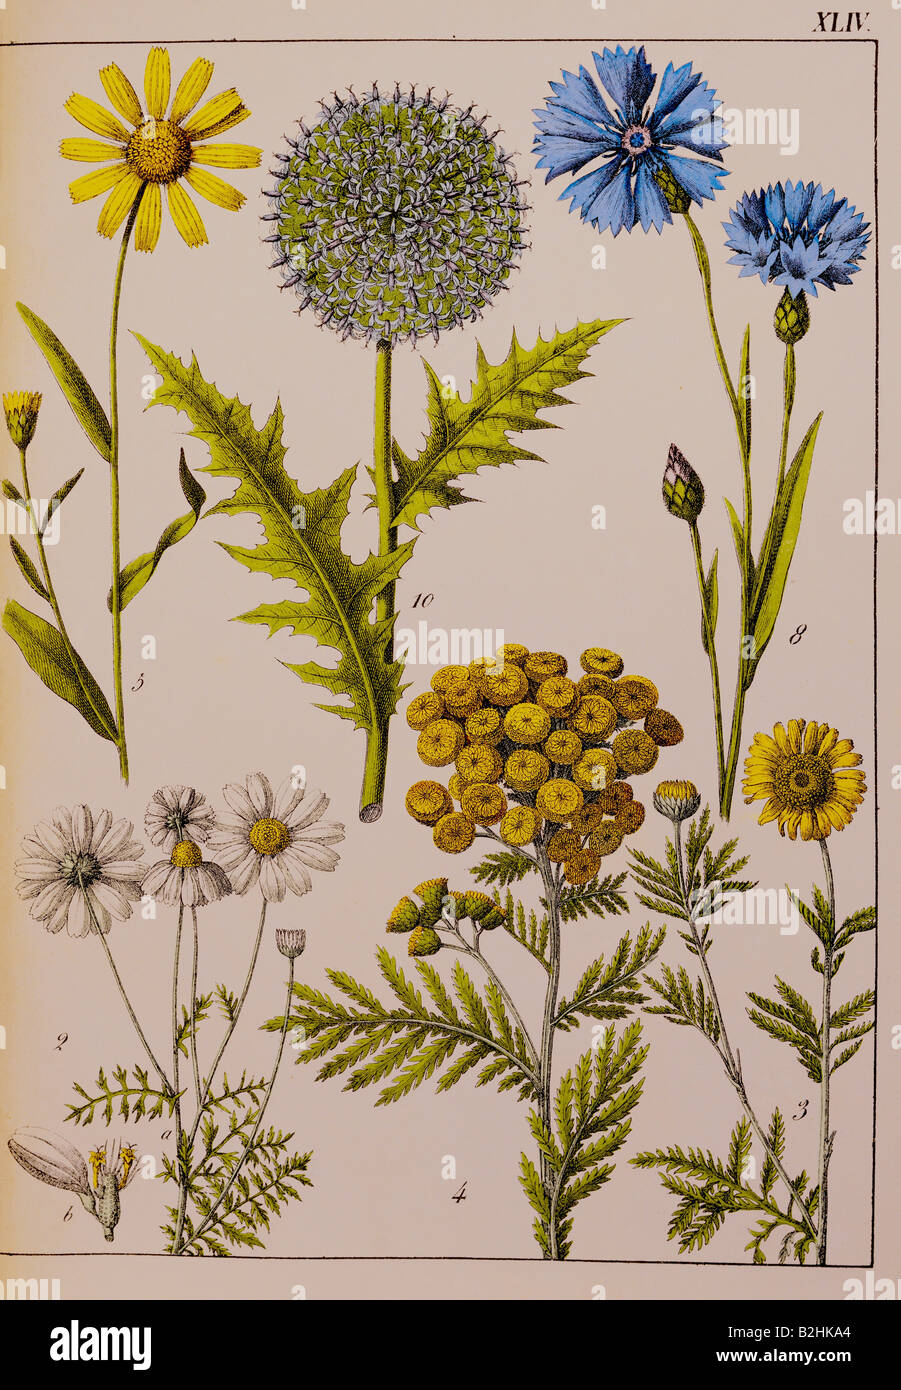 botany, flowers, from 'Naturgeschichte des Pflanzenreichs in Bildern' (Natural history of the kingdom of plants in pictures), Stuttgart, Esslingen, Germany, 1853, private collection, , Stock Photo